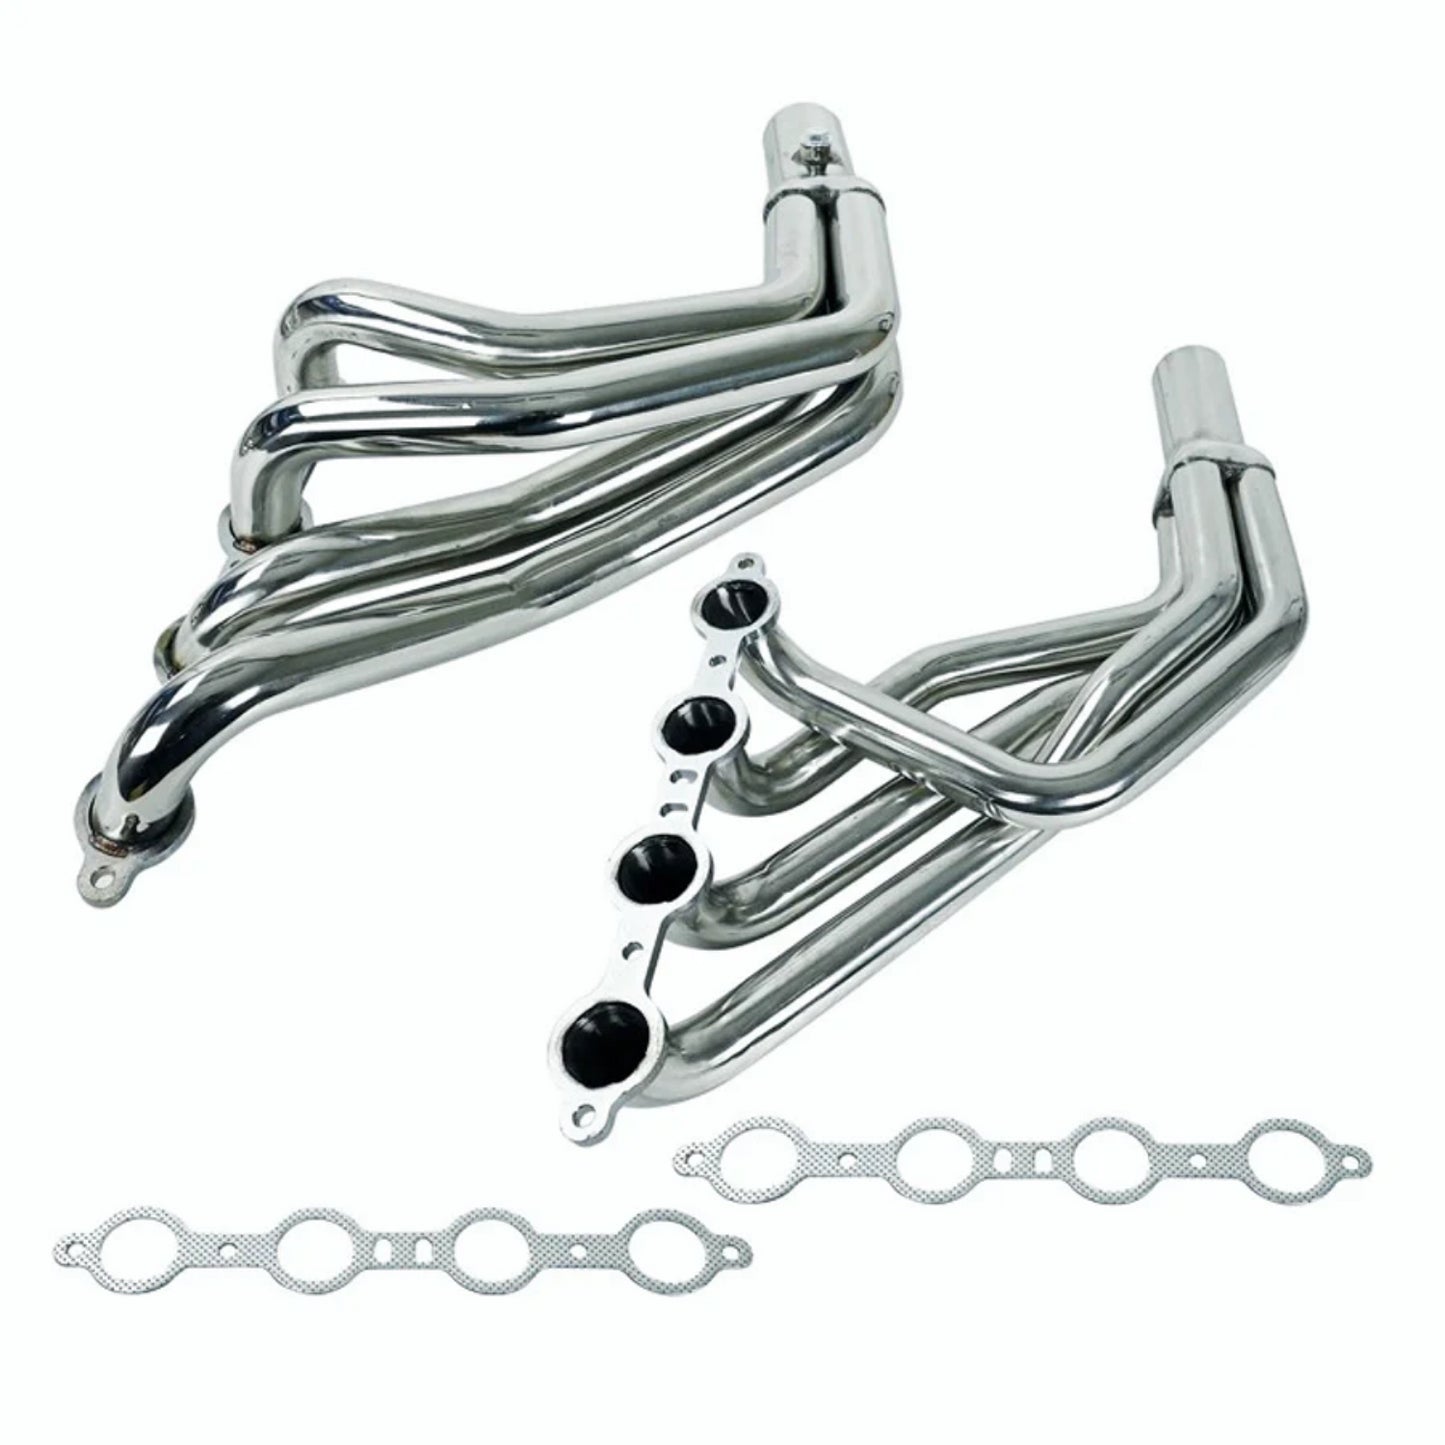 Exhaust Manifold Header For 1979-1993 & 1994-2004 Ford Mustang 4.8L 5.3L Fox Body LS Conversion Swap Headers